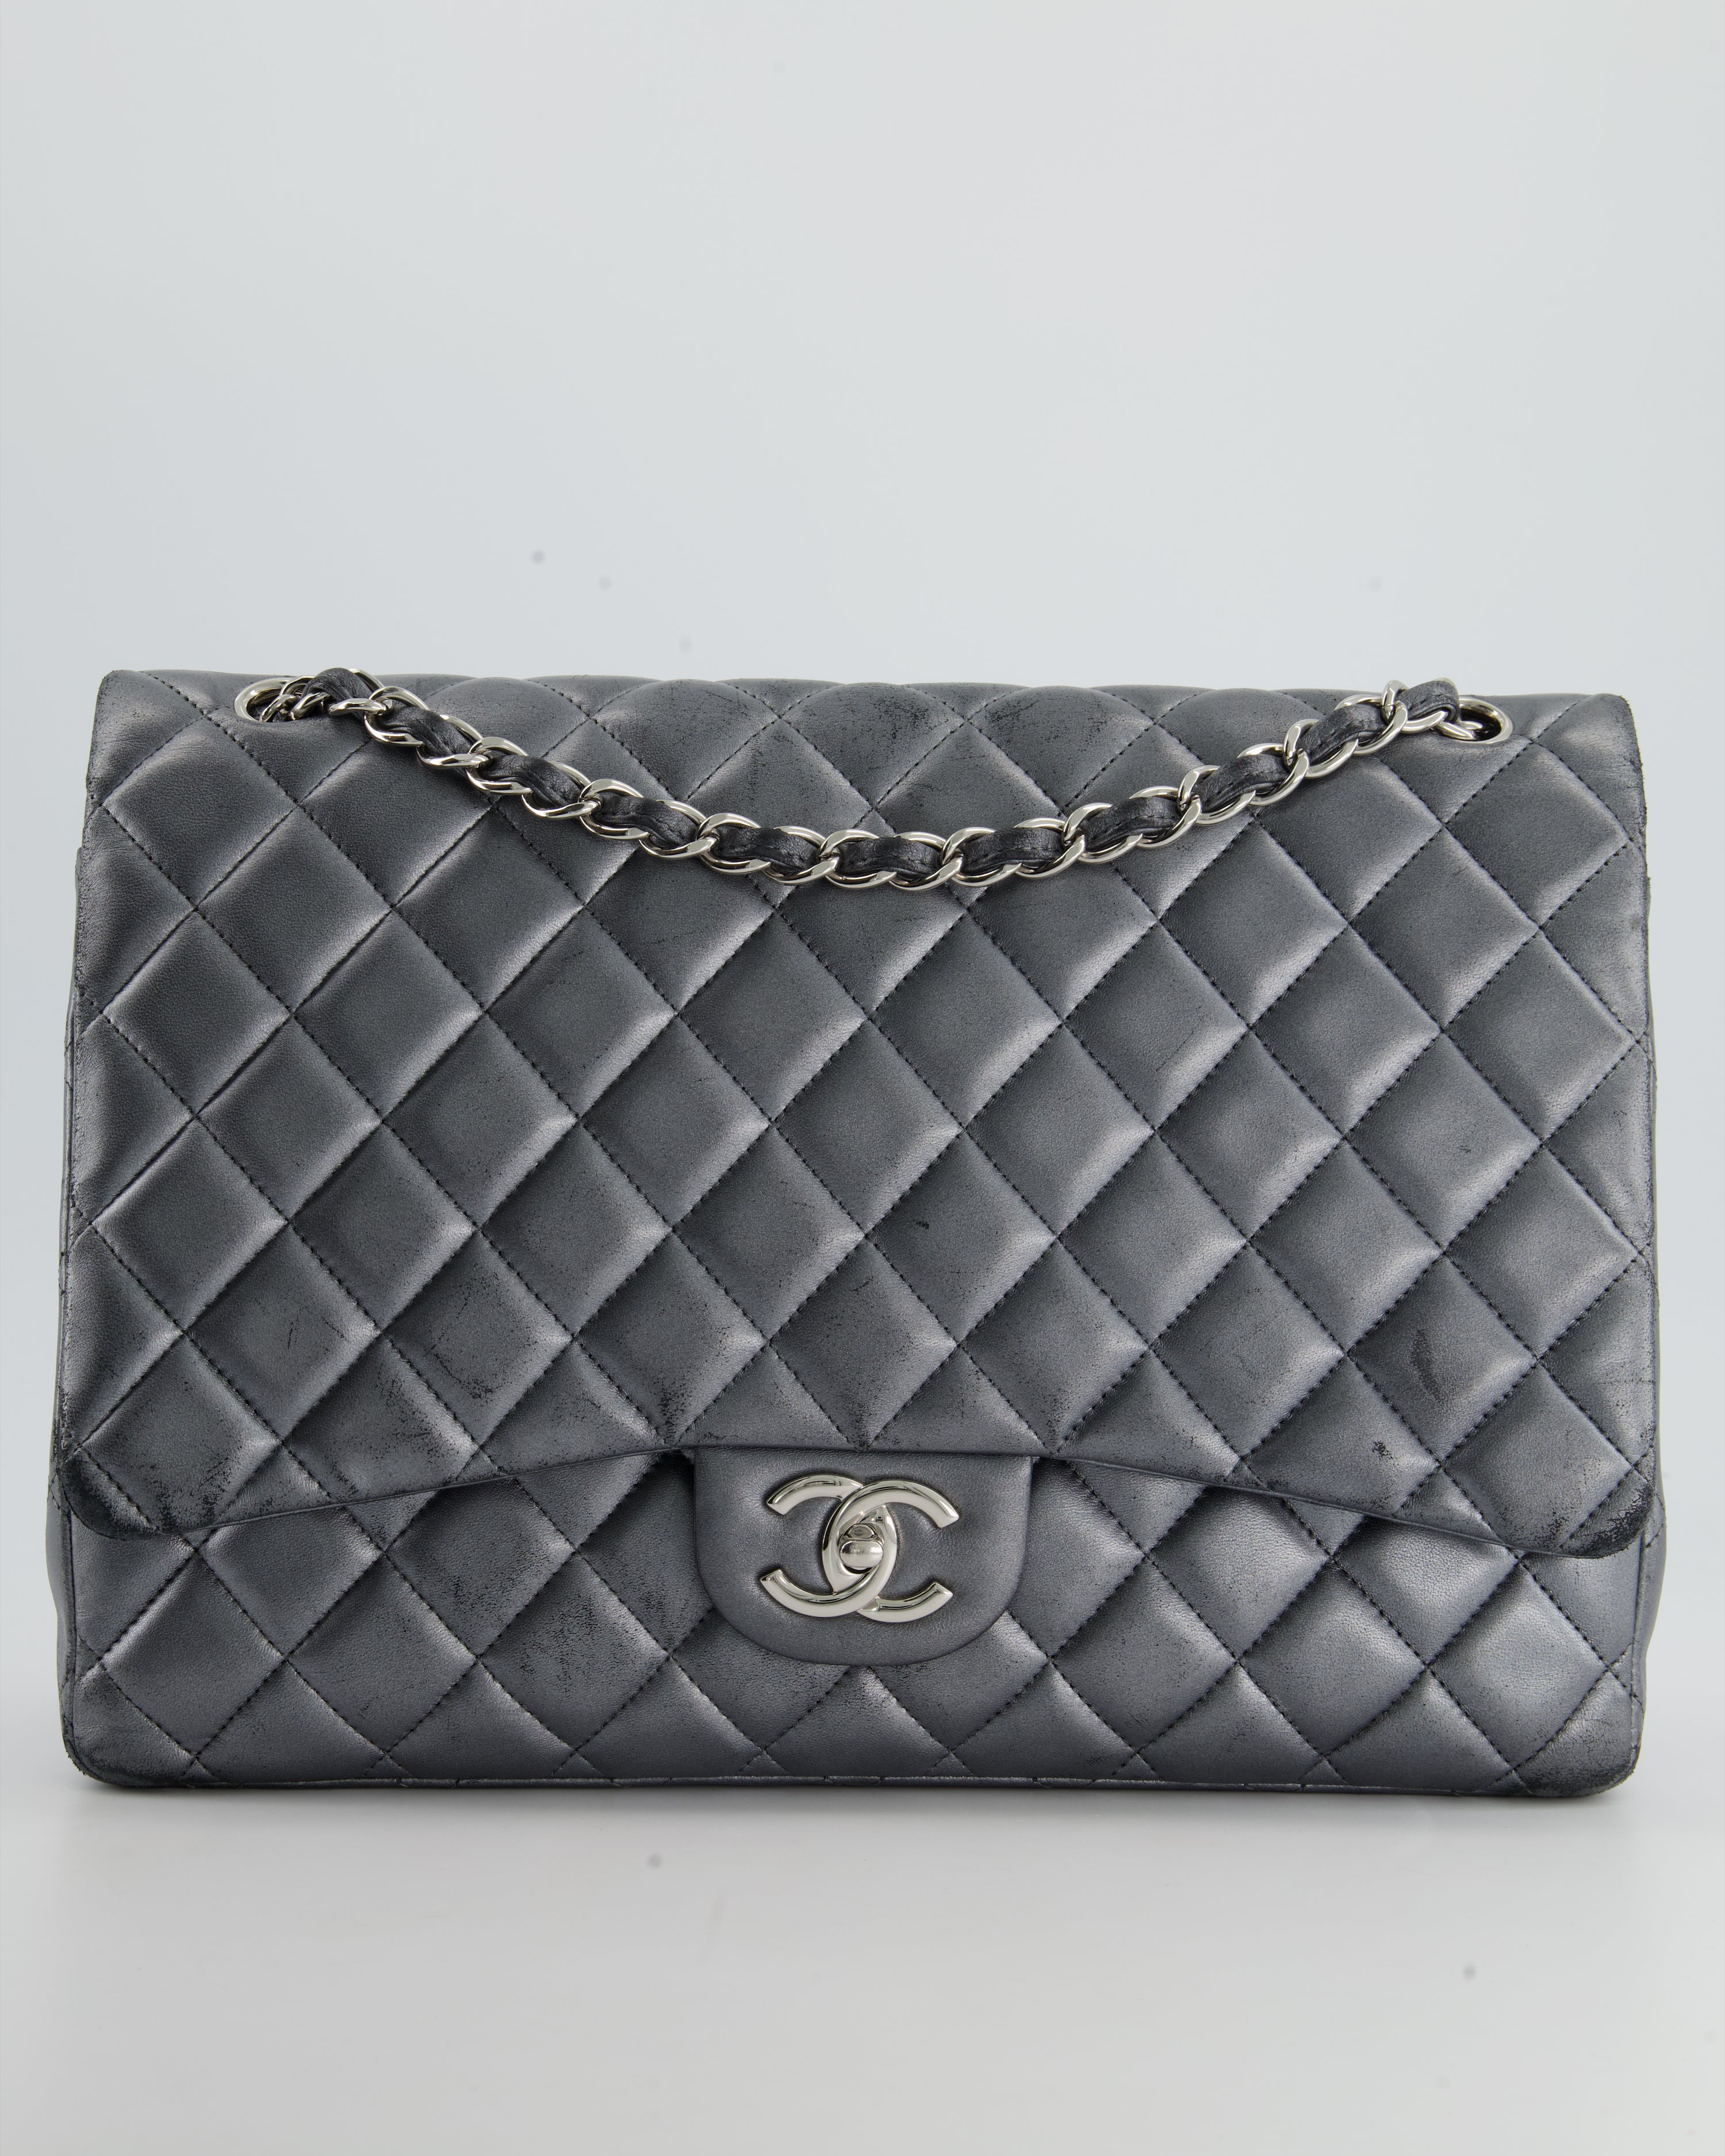 *Fire Price* Chanel Silver Metallic Classic Maxi Double Flap Bag in Lambskin Leather With Silver Hardware RRP £9,760